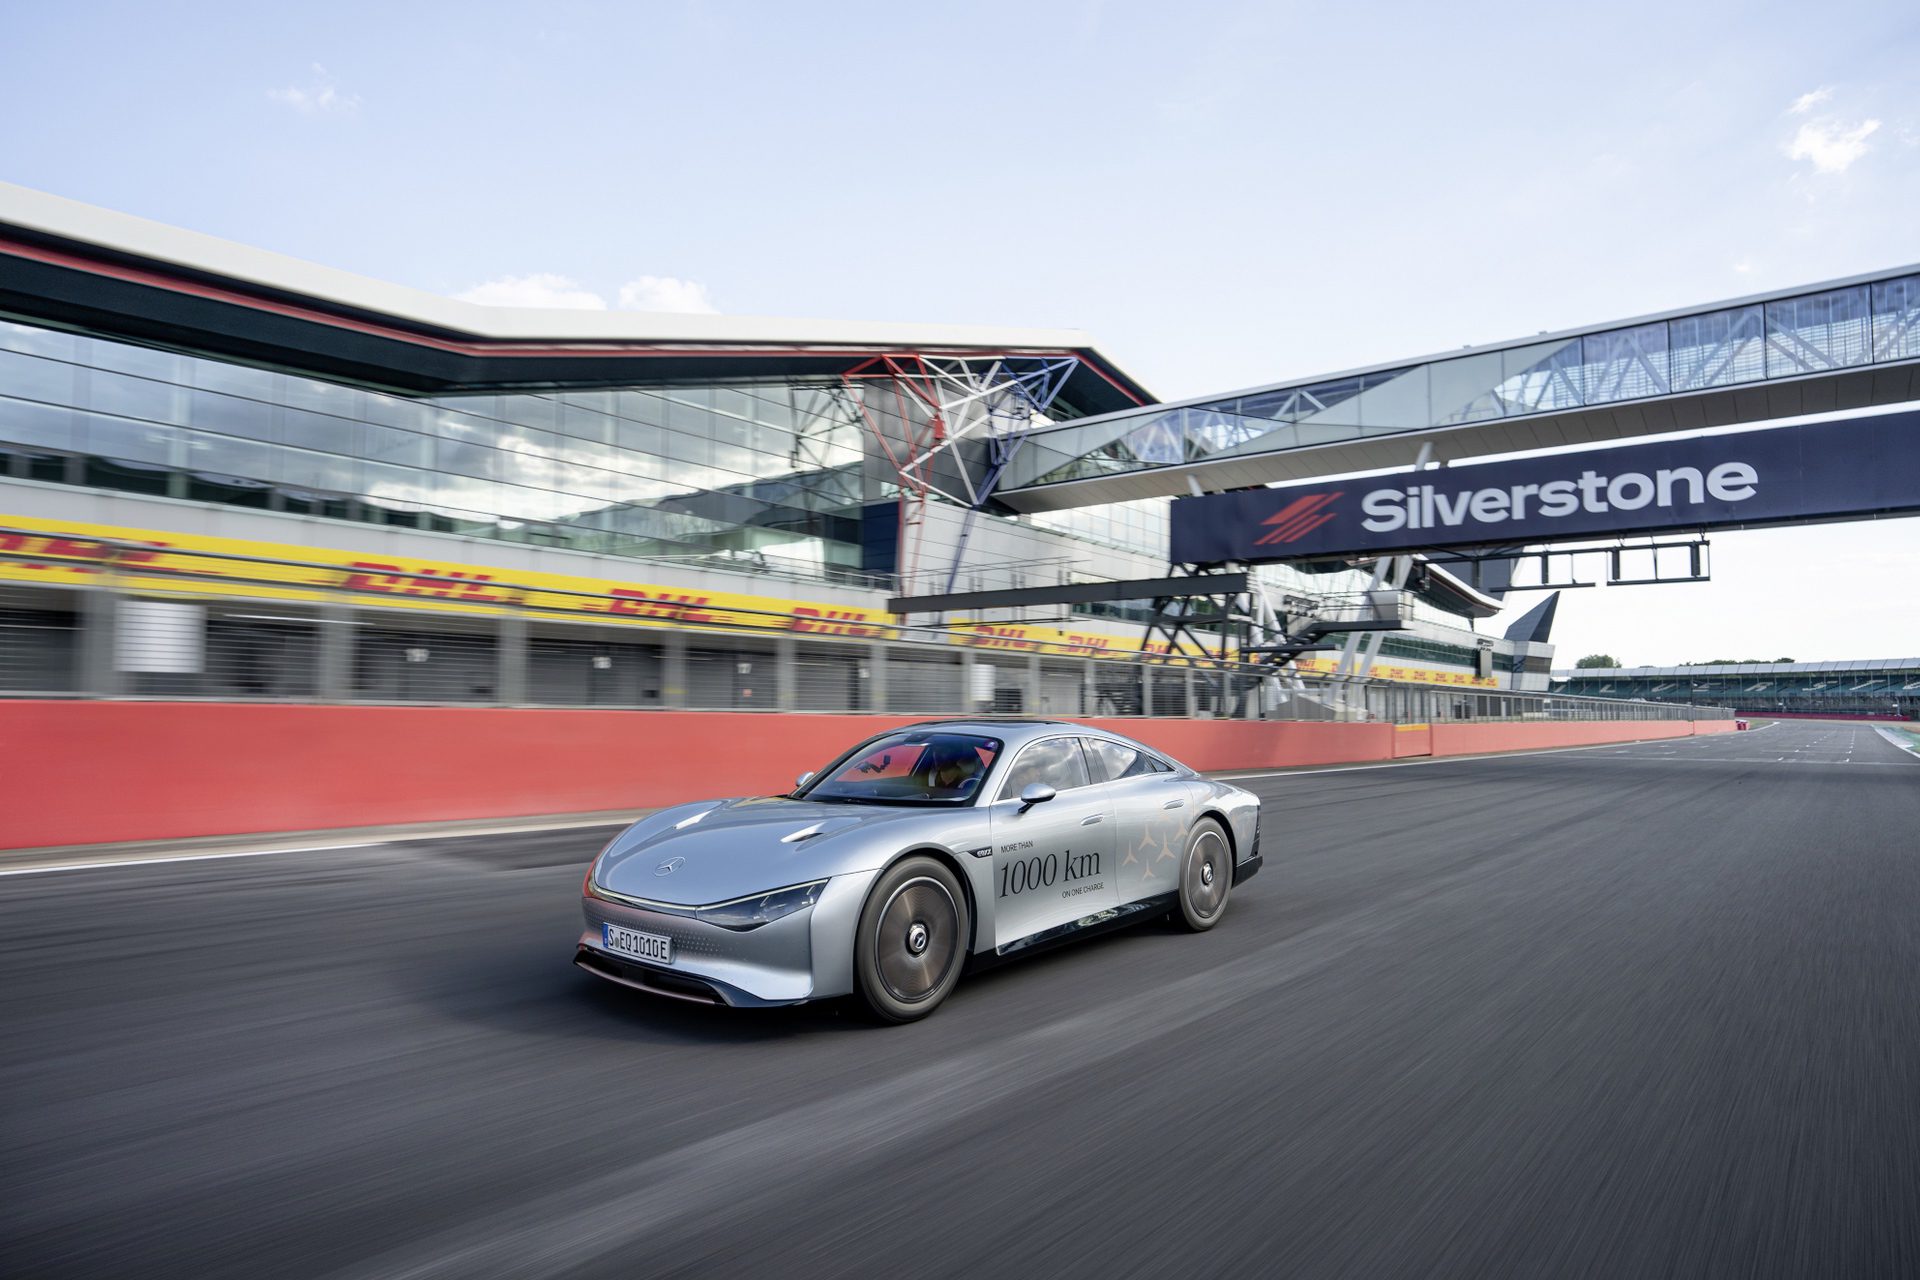 Driving at speed around Silverstone, where the VISION EQXX completed 11 laps